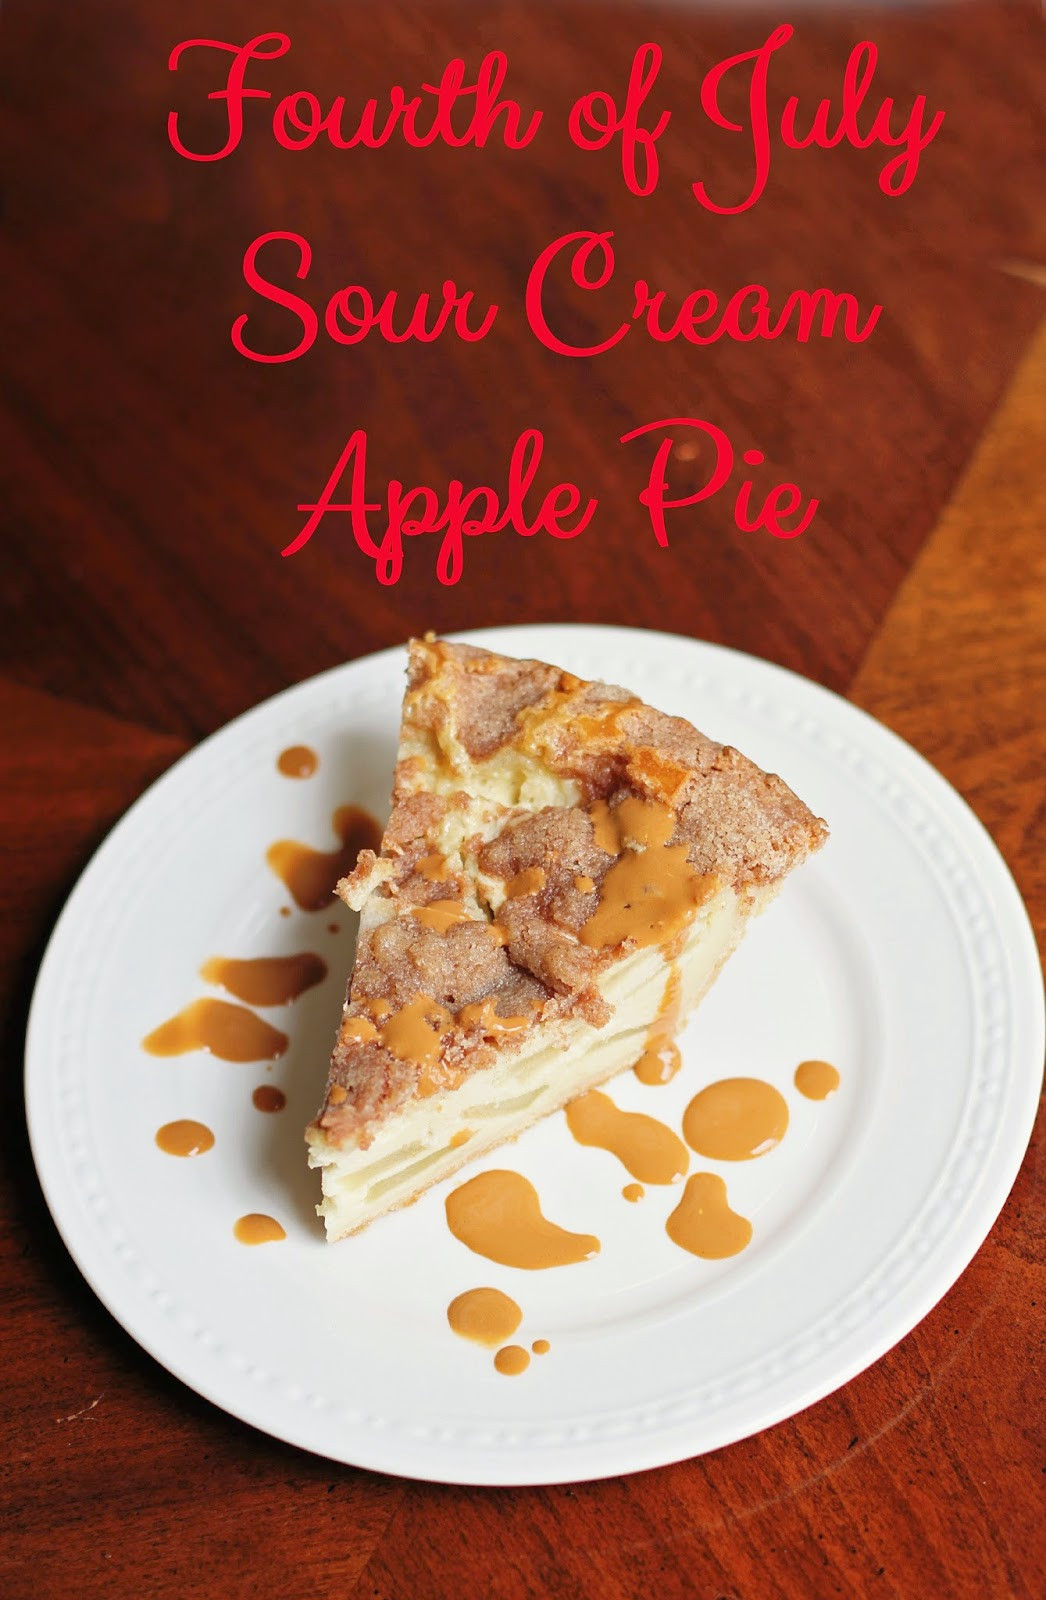 Apple Pie 4Th Of July
 Running from the Law Fourth of July Sour Cream Apple Pie